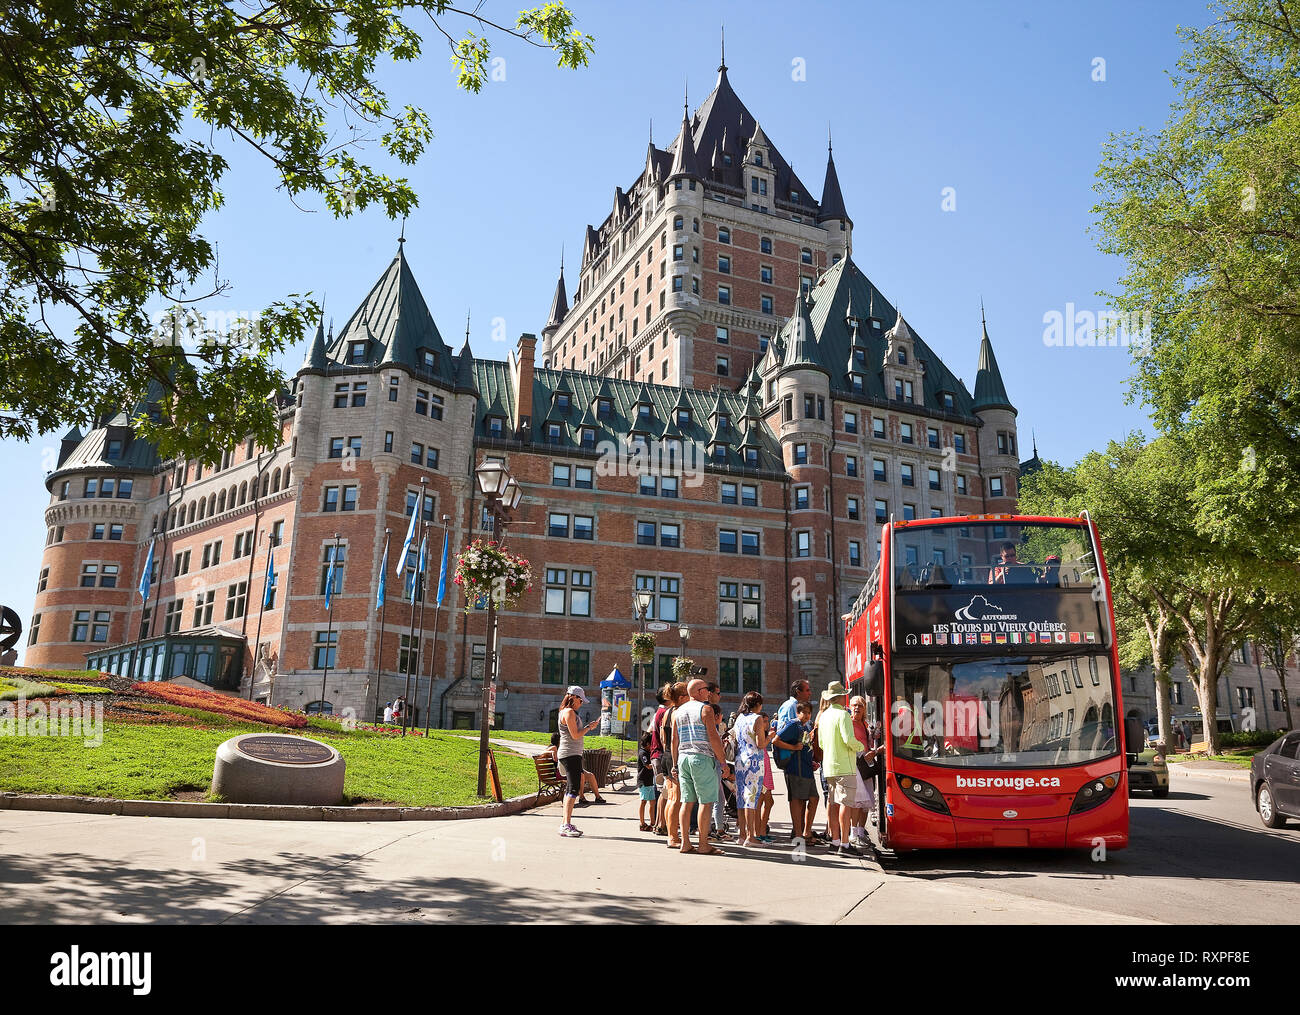 Group of tourists boarding a tour bus in front of the Chateau Frontenac in Old Quebec City, Province of Quebec, Canada Stock Photo